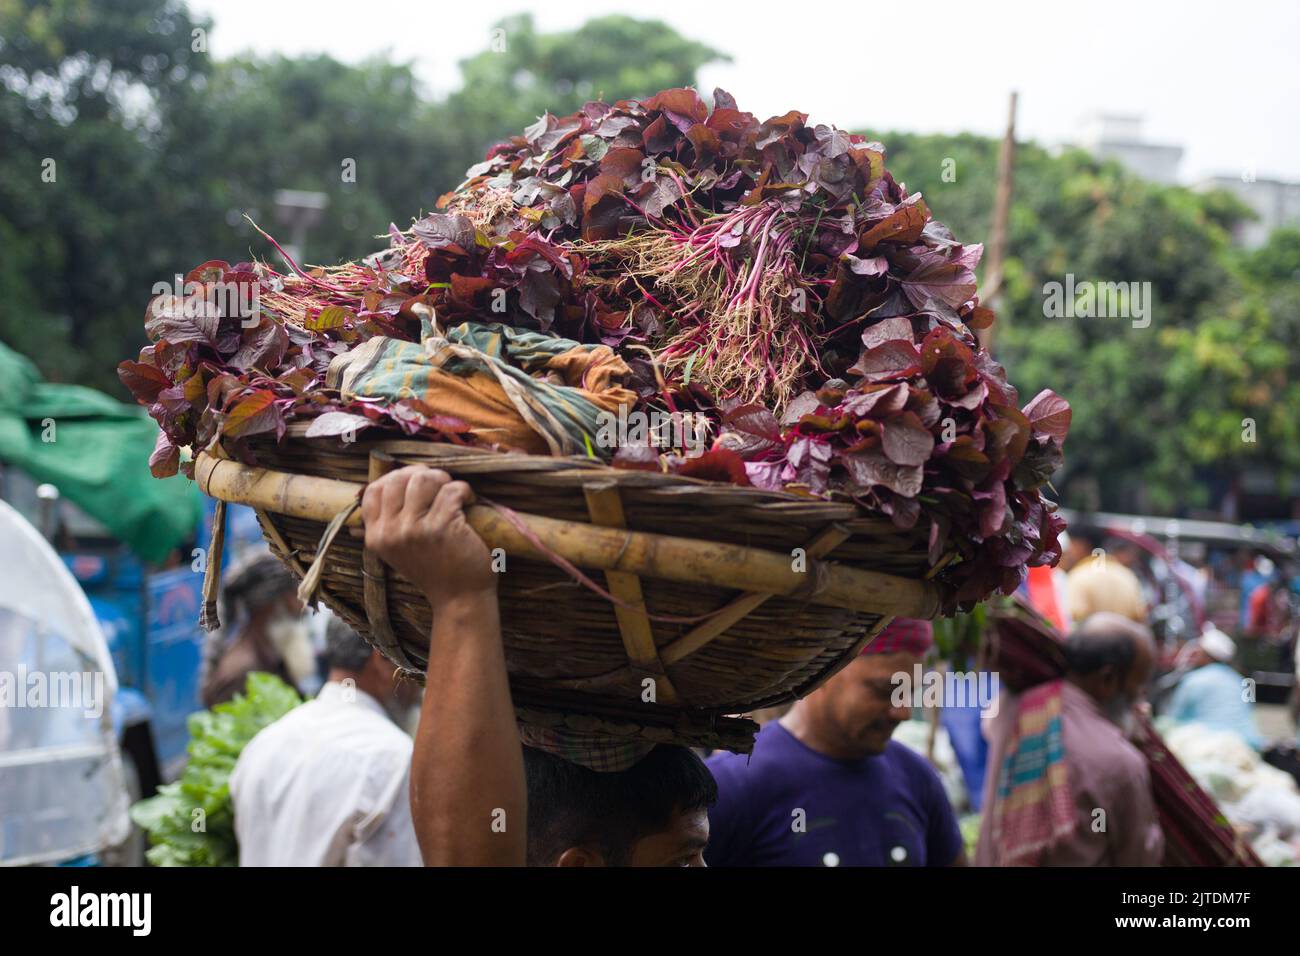 A scenery of a rural vegetable market at Kalatia, near Dhaka. Farmers are selling their fresh vegetables to traders—this is garden-fresh production. Stock Photo